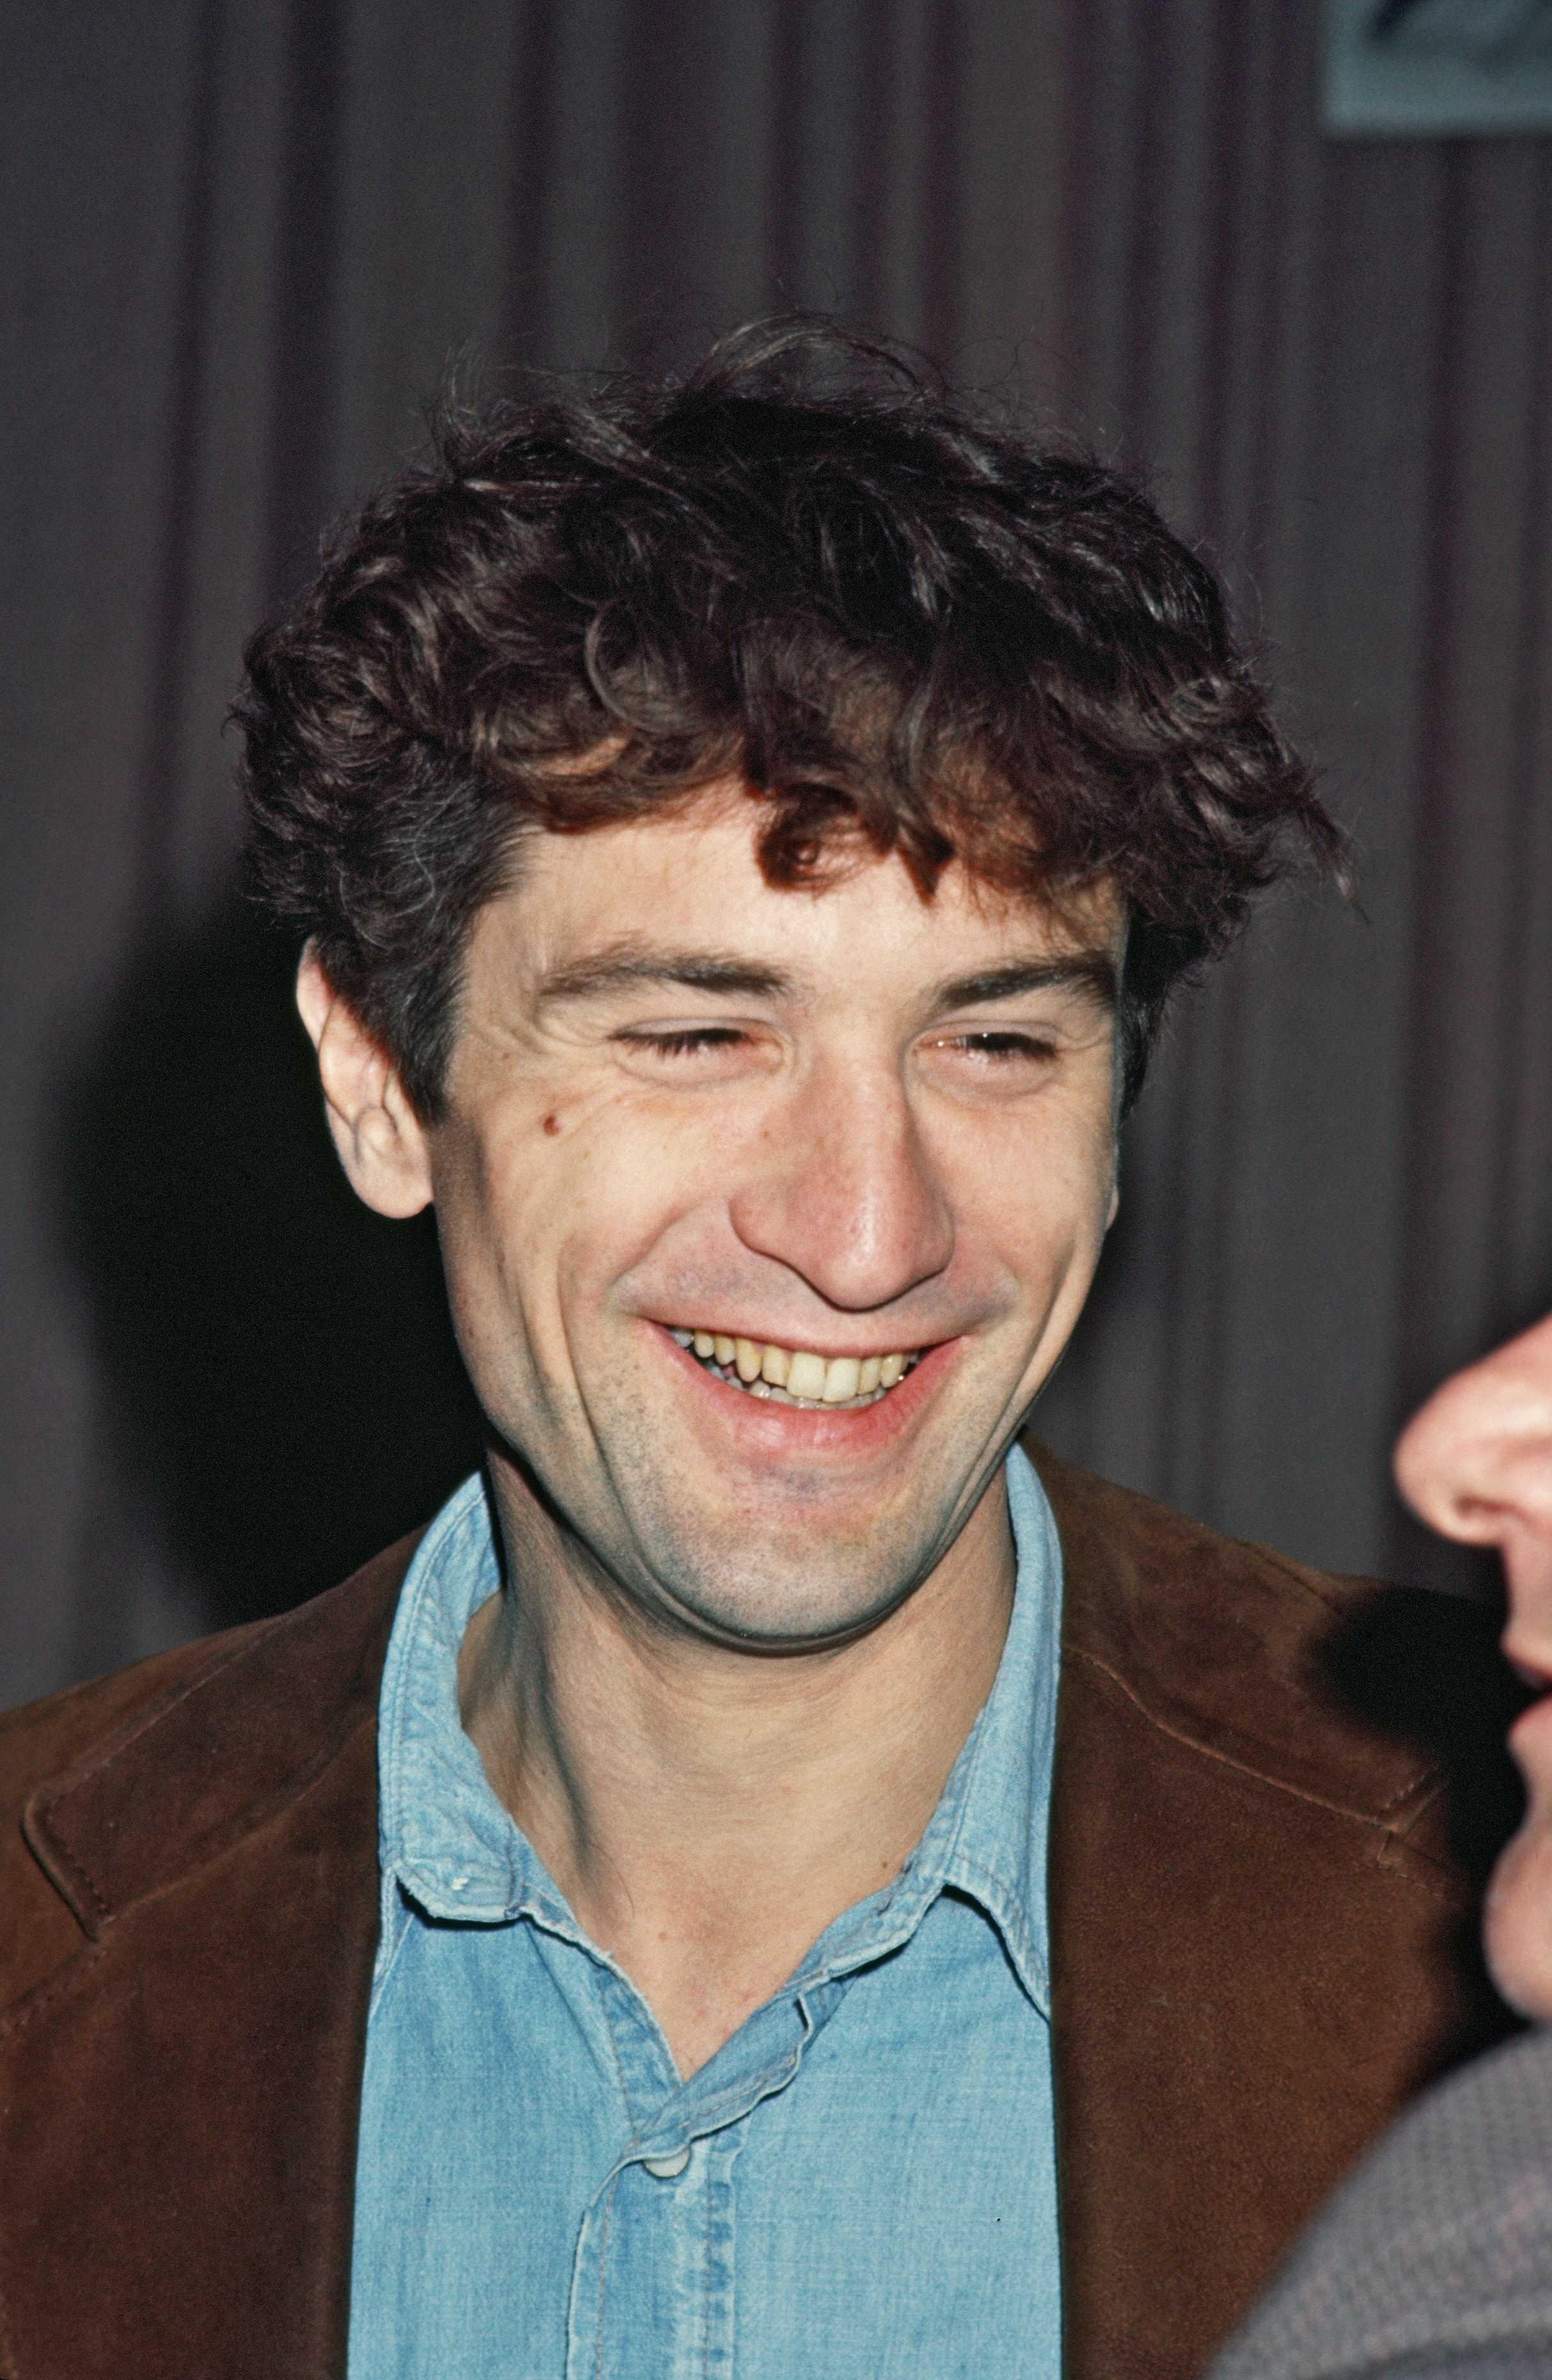 De Niro in a jean shirt and brown jacket